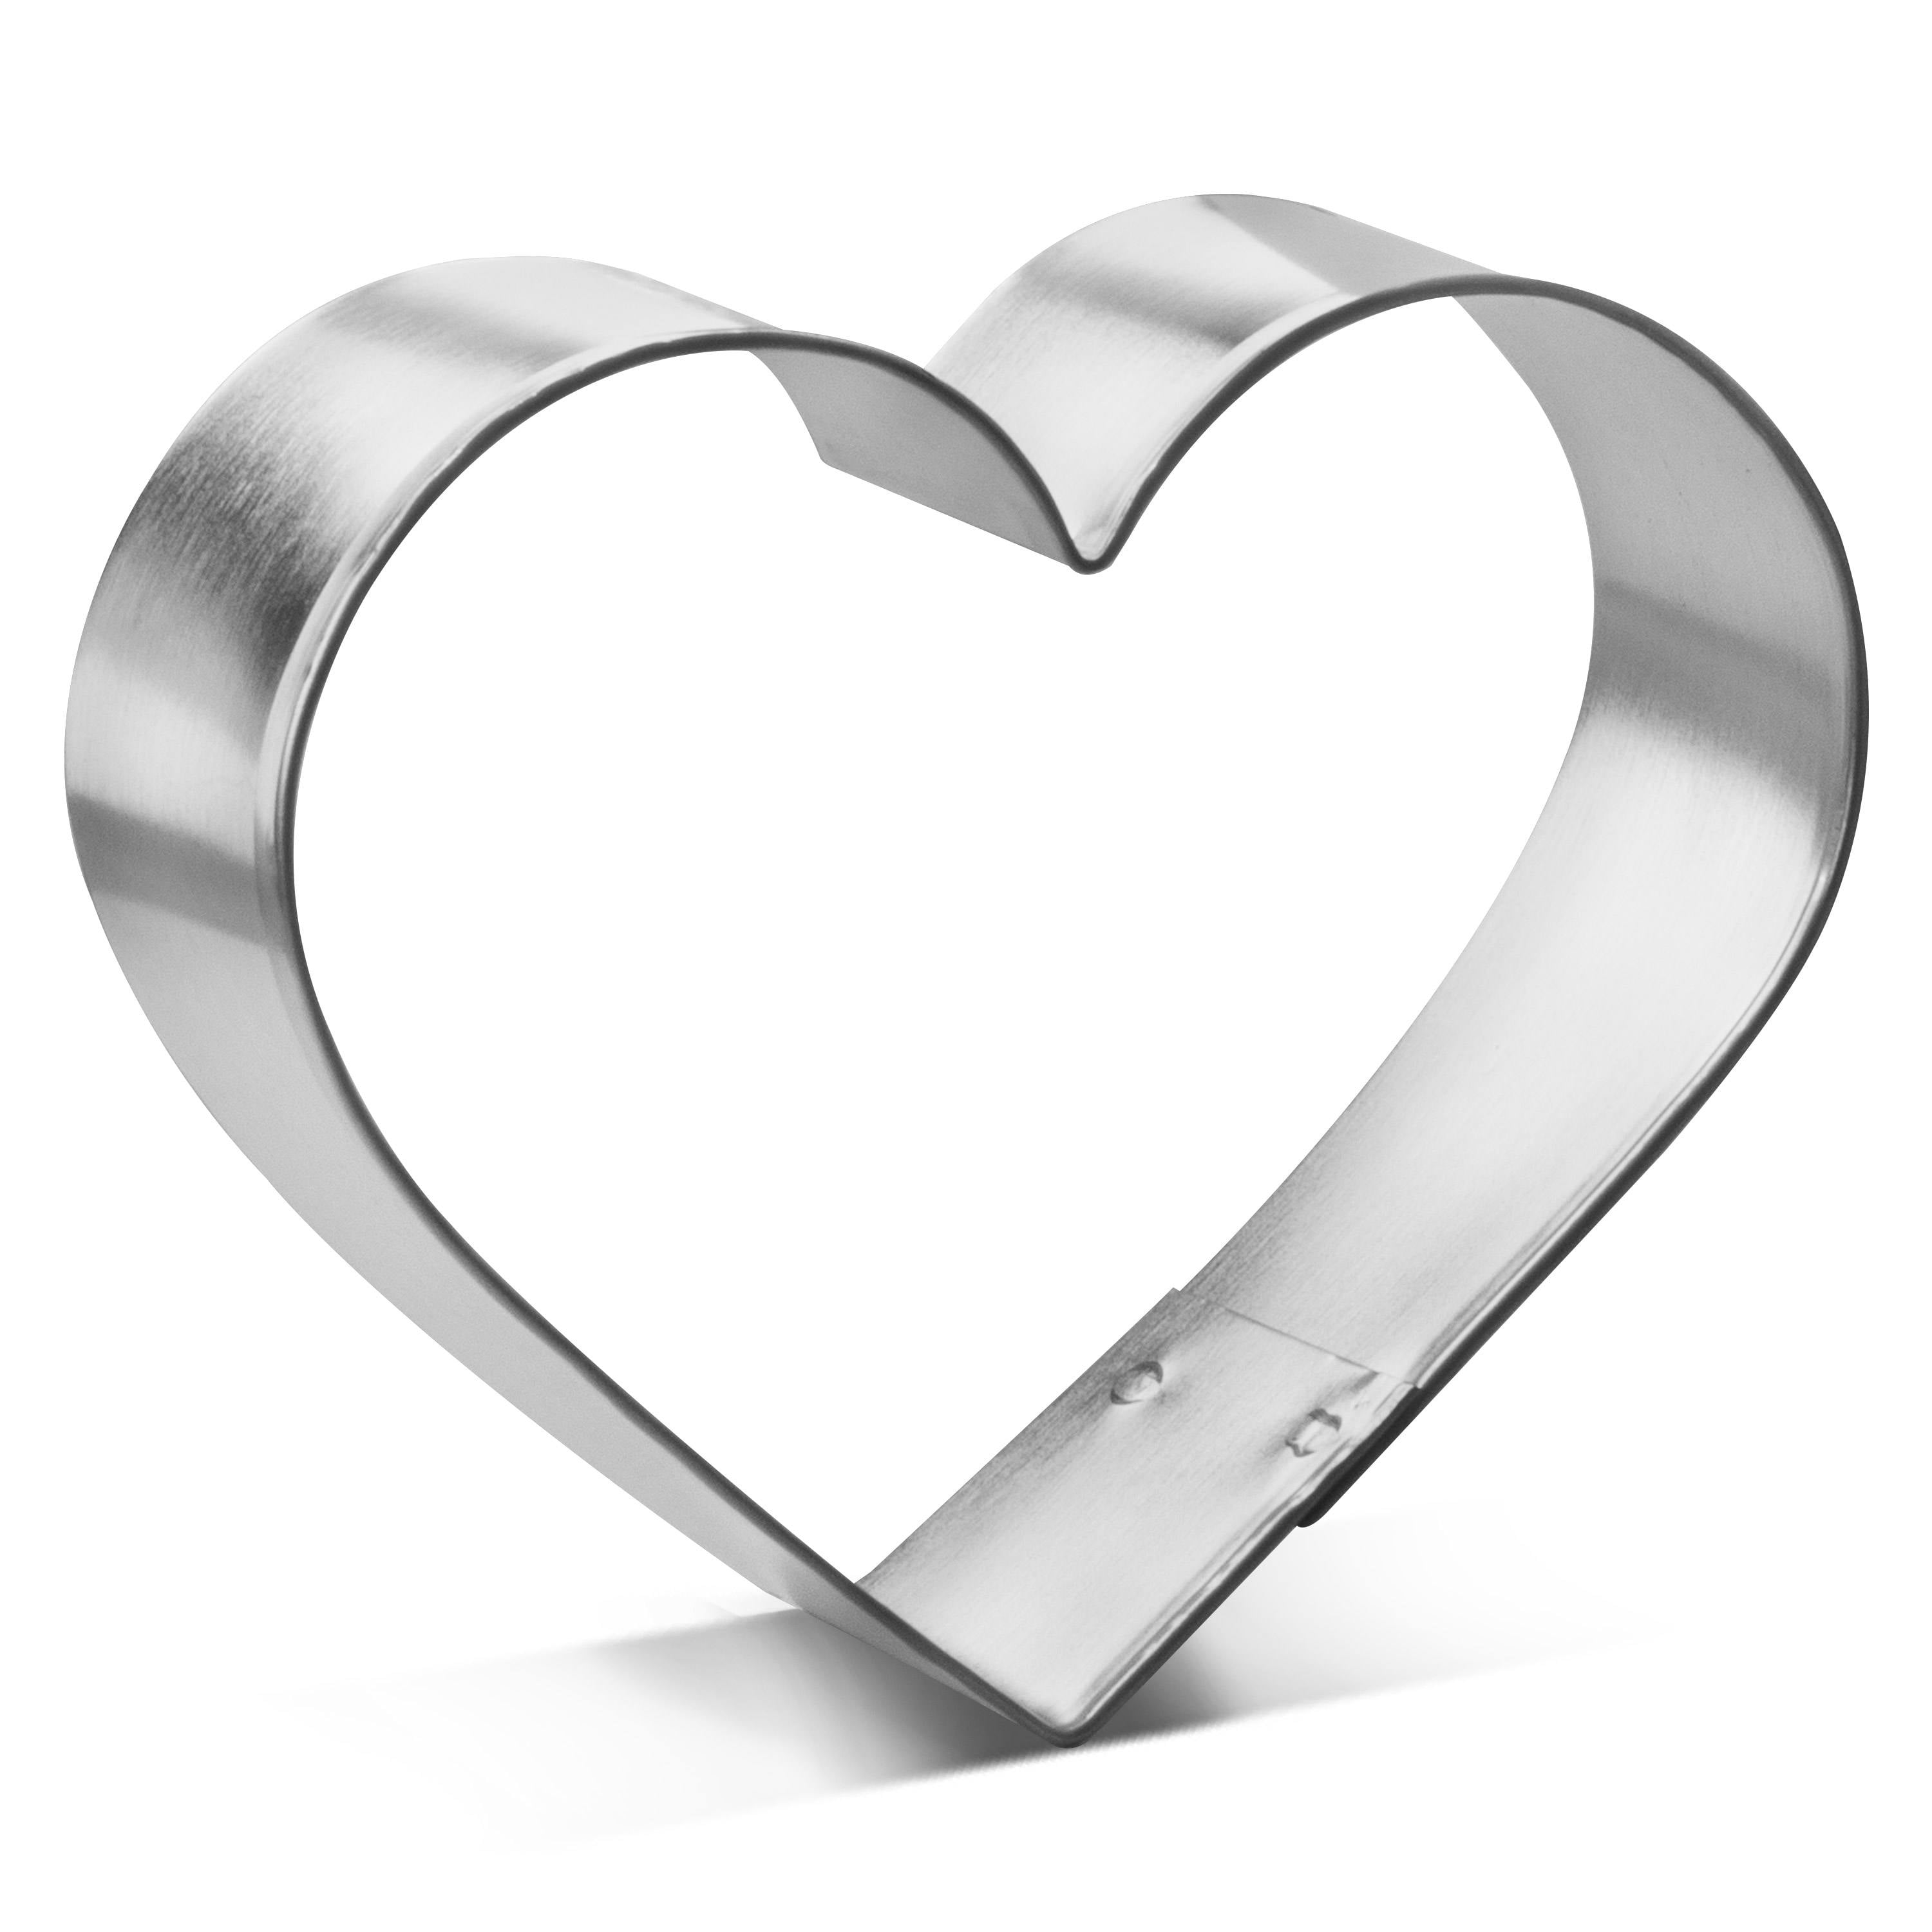 SET OF 3 HEART COOKIE CUTTERS 